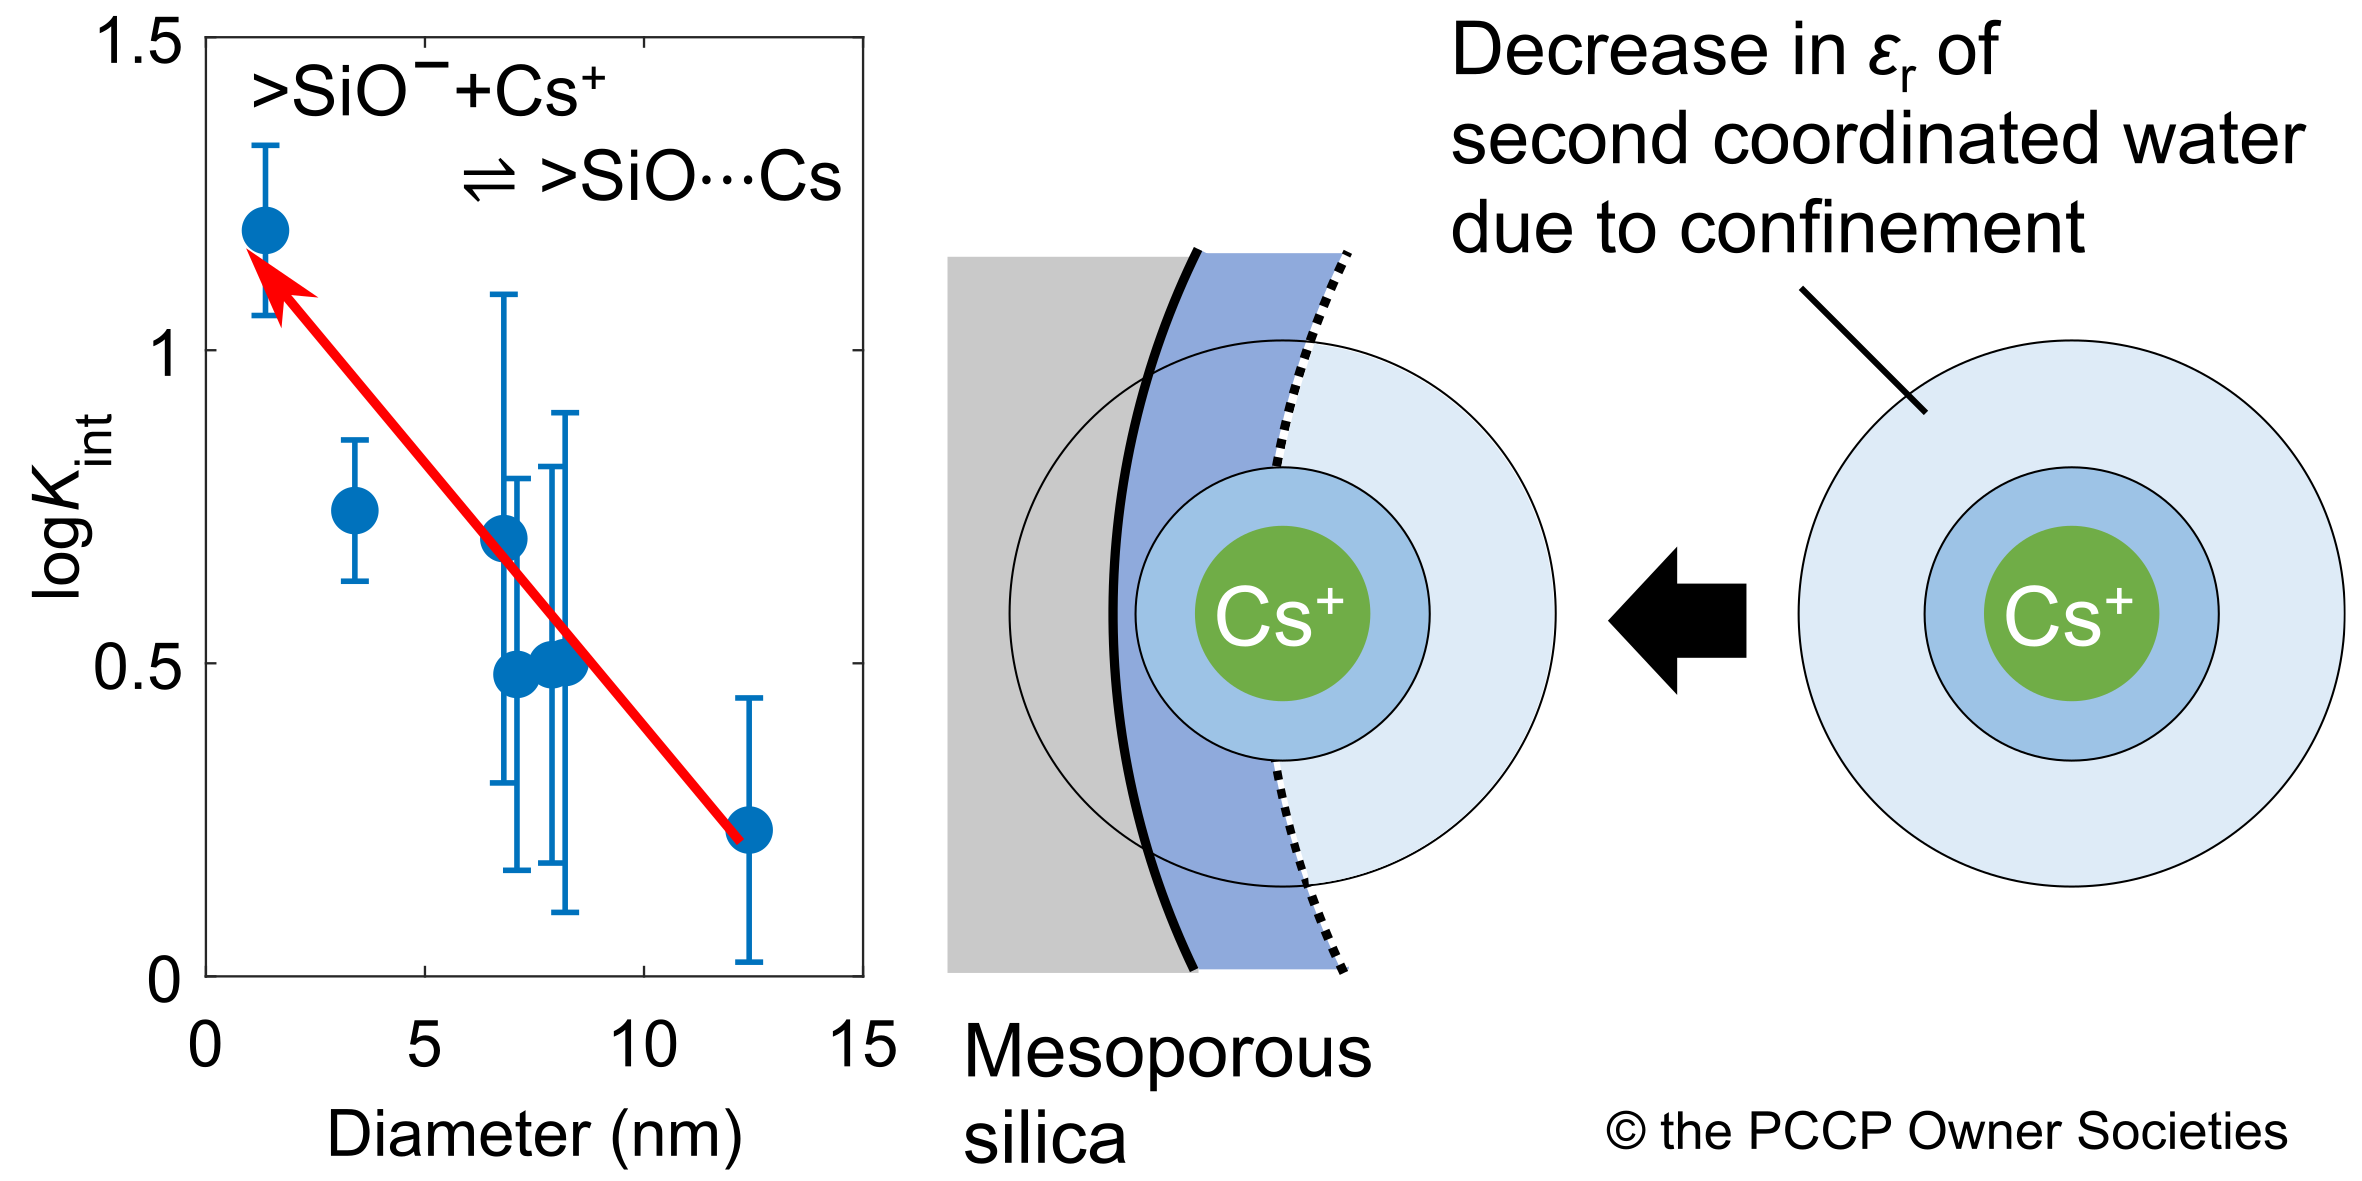 Figure 2 Logarithms of intrinsic equilibrium constants for adsorption of Cs+ as a function of the pore size (left part) and conceptual diagrams of Cs+ adsorbed inside the nano-sized pore of silica (right part). (Reproduced from [5] with permission from the PCCP Owner Societies.)